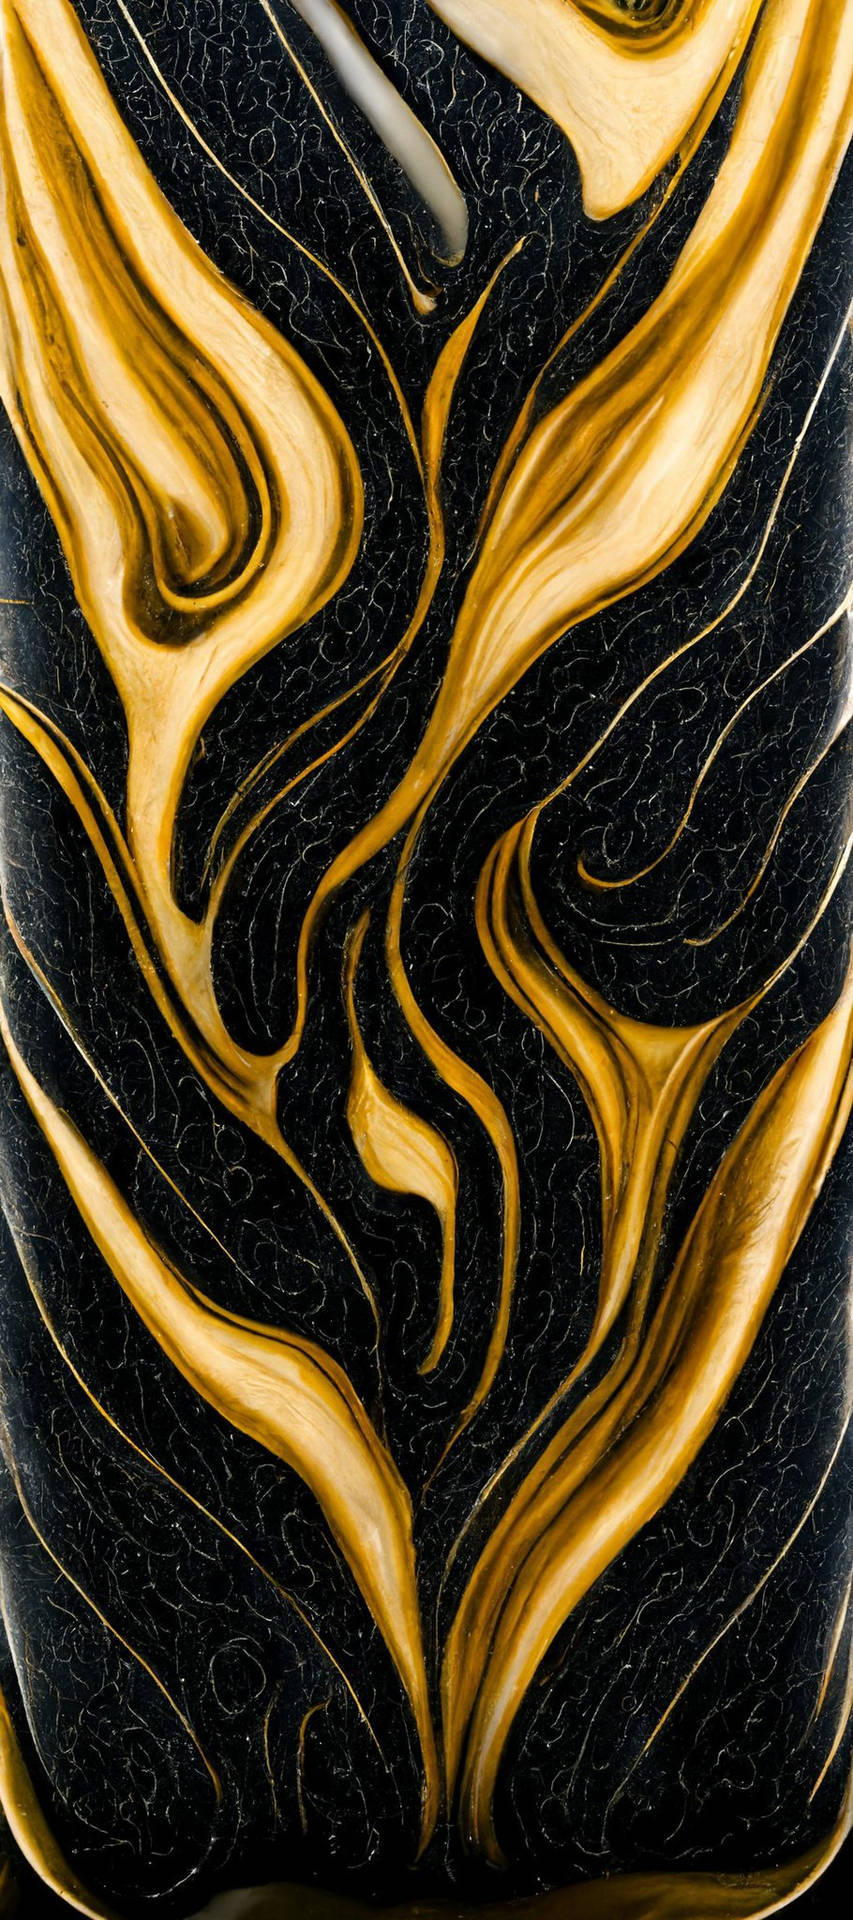 Gold Texture And Black Patterns Background